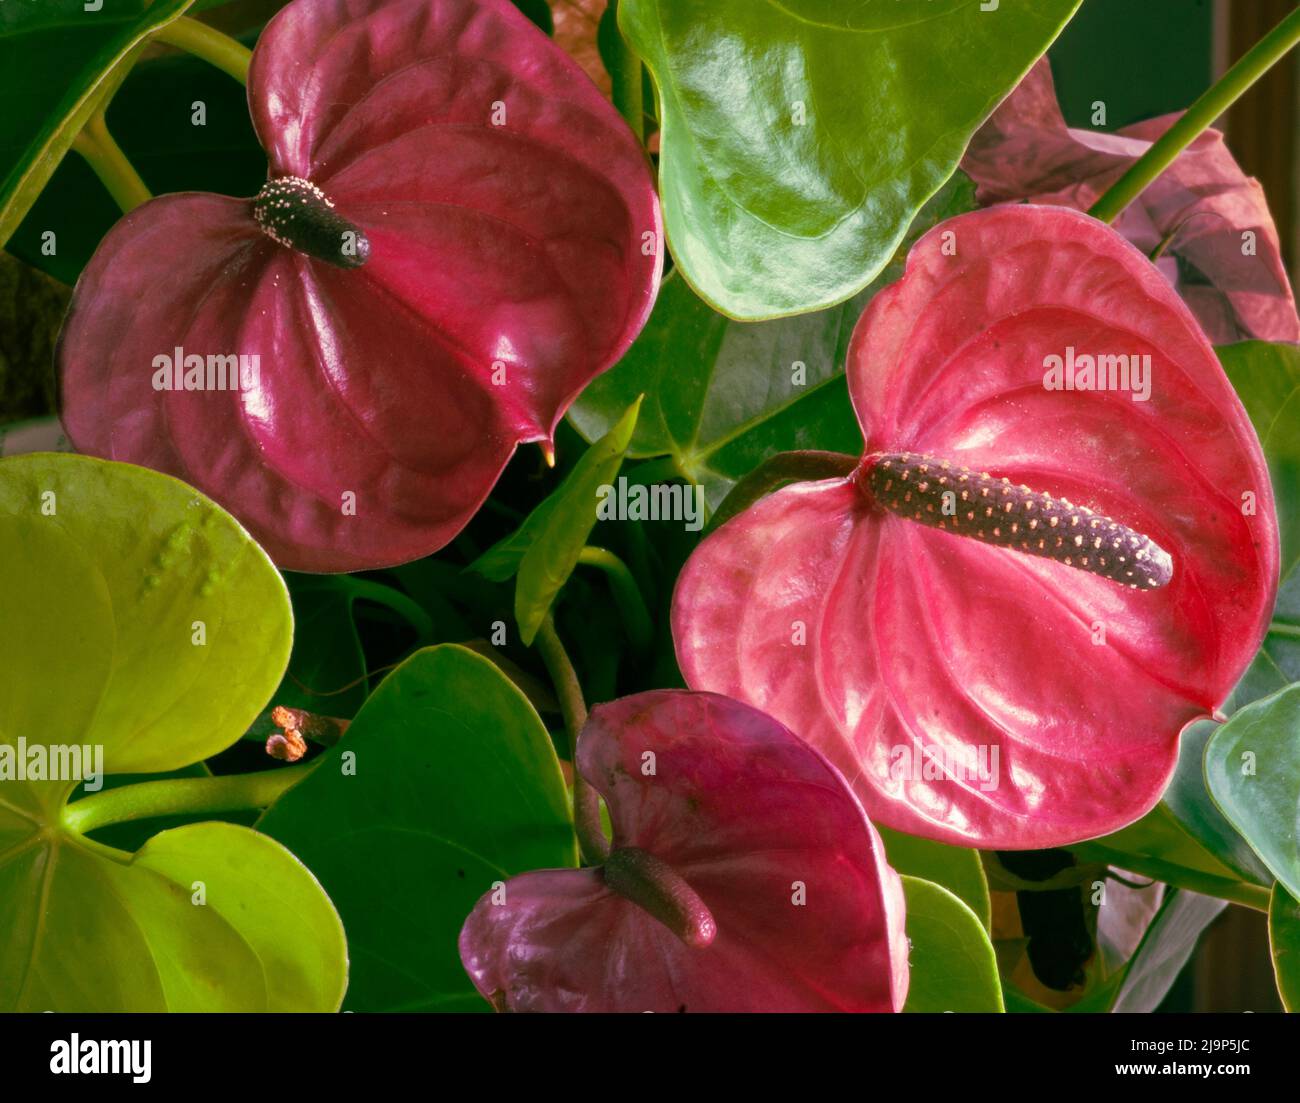 Anthurium plant is seen closeup with 3 maroon flowers surrounded by the waxy leaves. Bisexual flowers are shown with spadix. Stock Photo